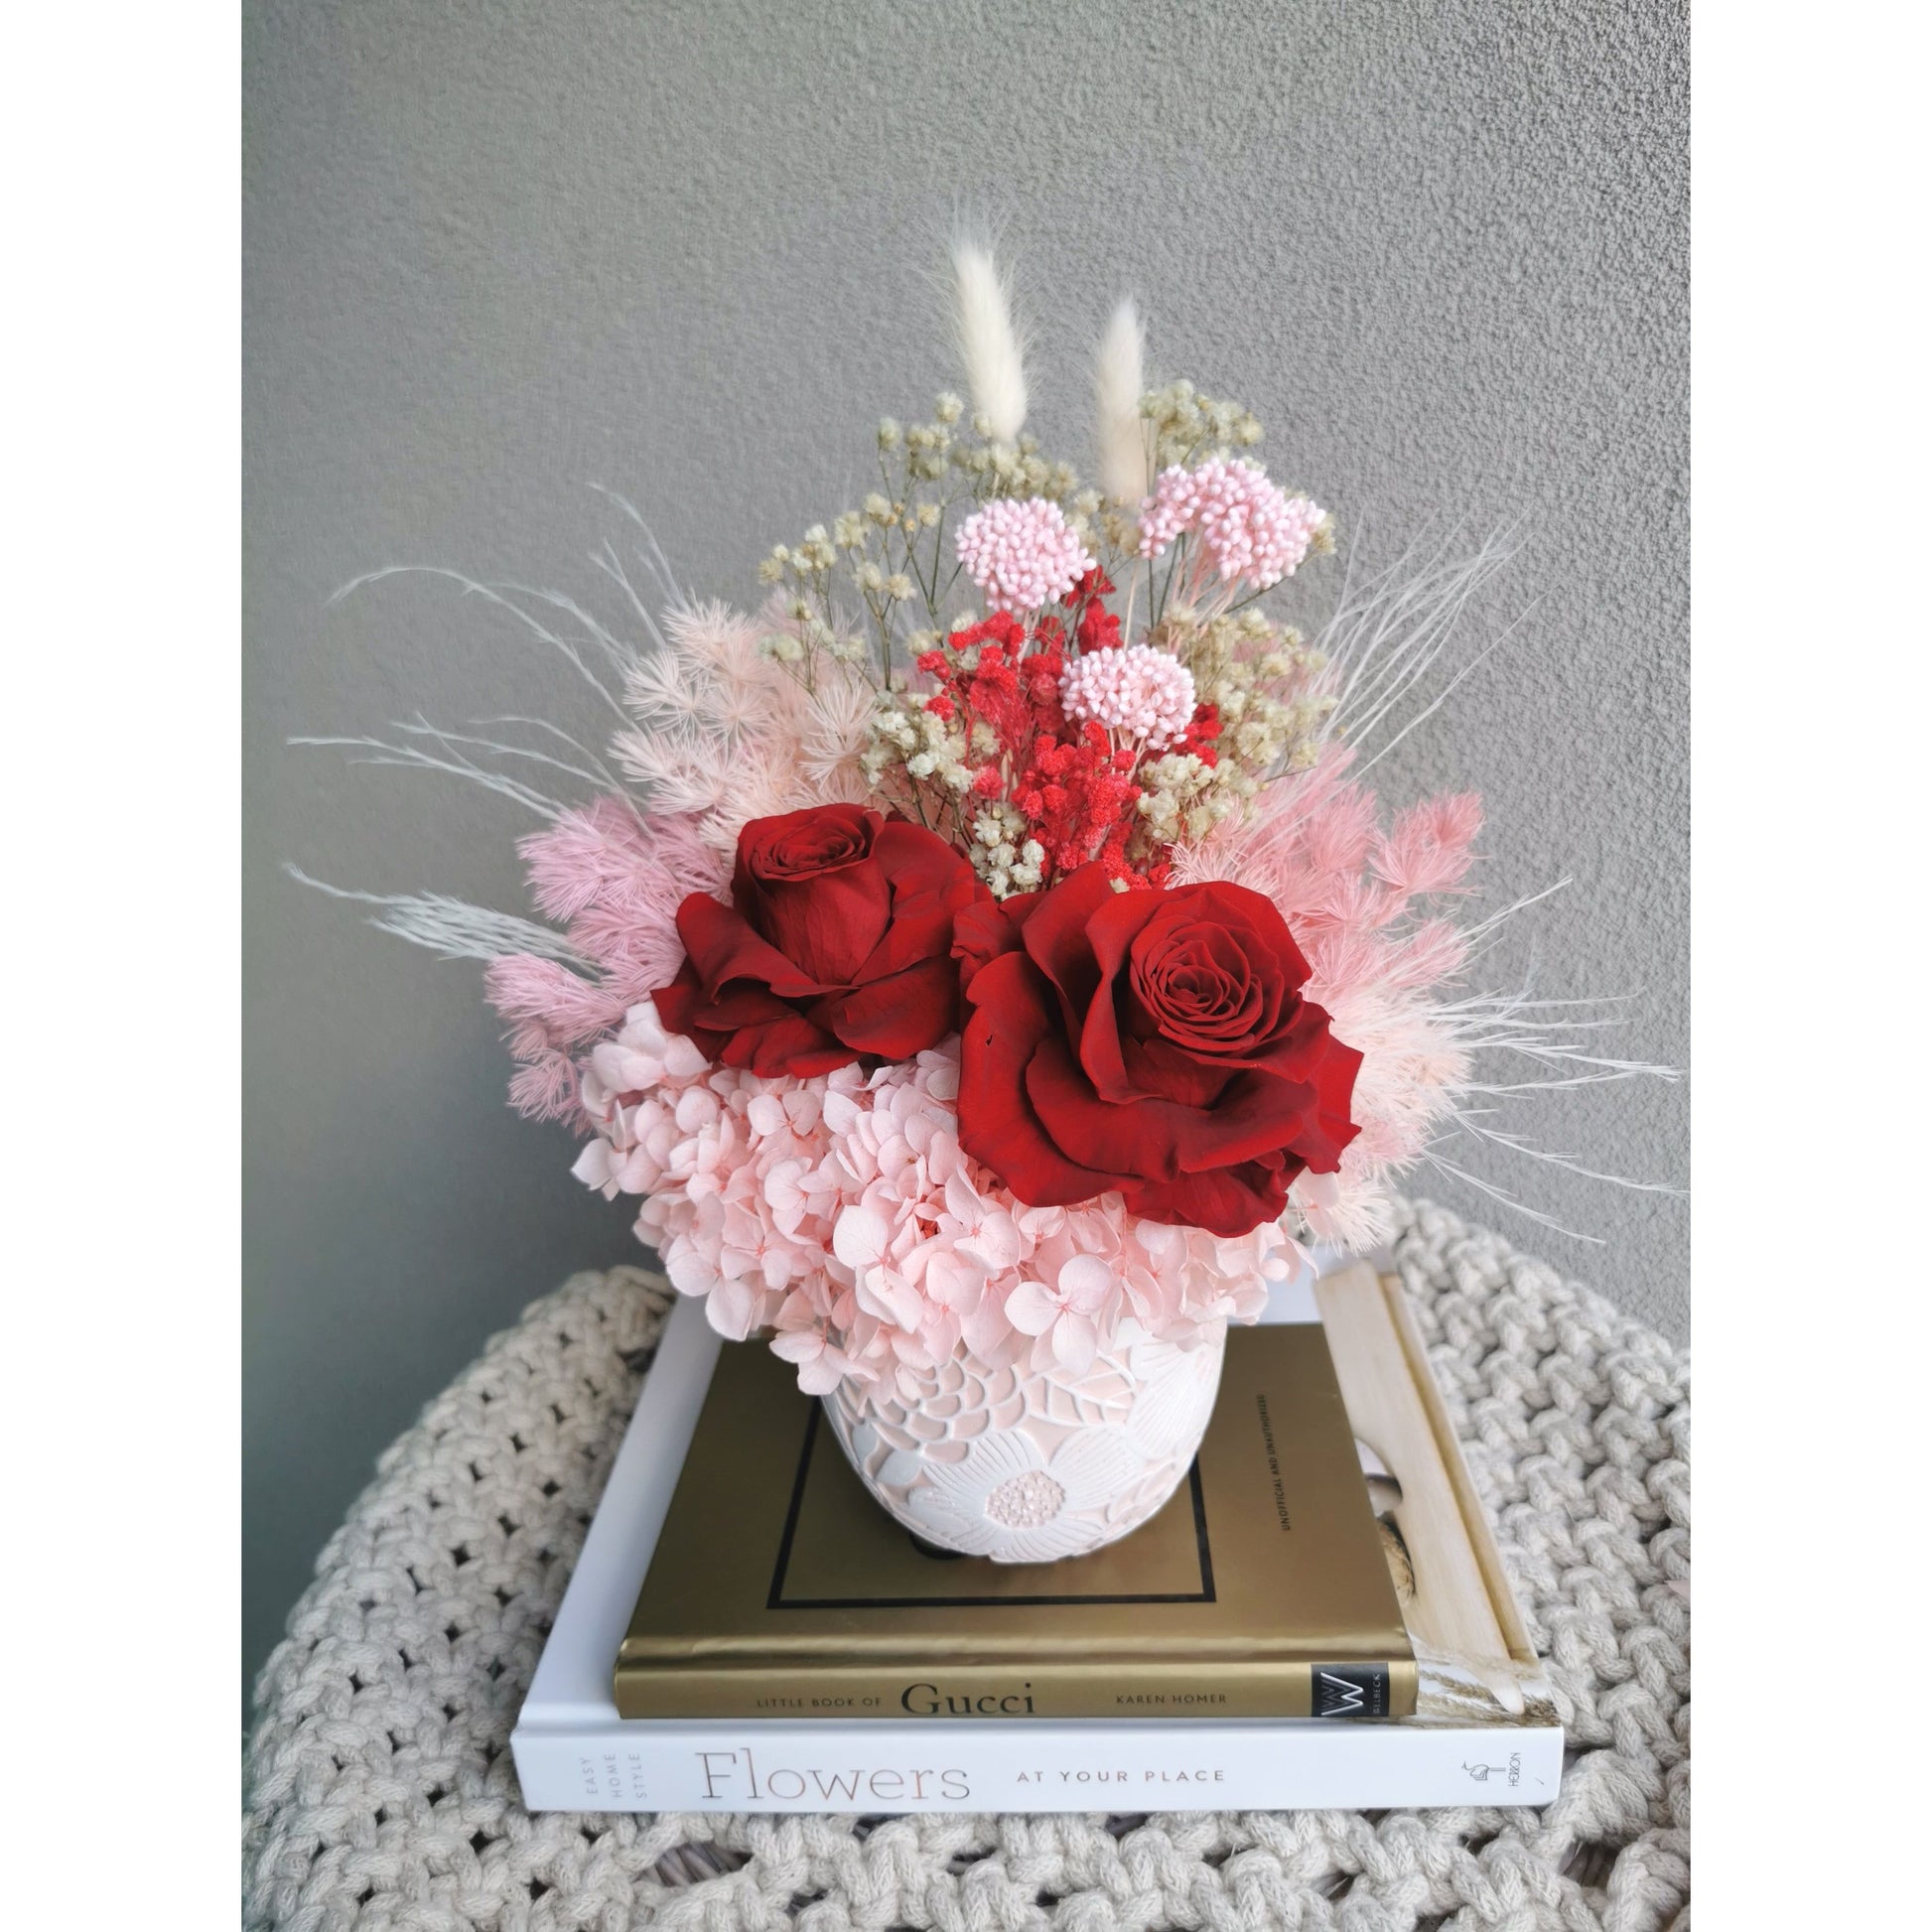 Valentines Day dried & preserved flower arrangement including 2 red roses and set in to a pink & white floral pot. Photo shows arrangement sitting on books against a blank wall